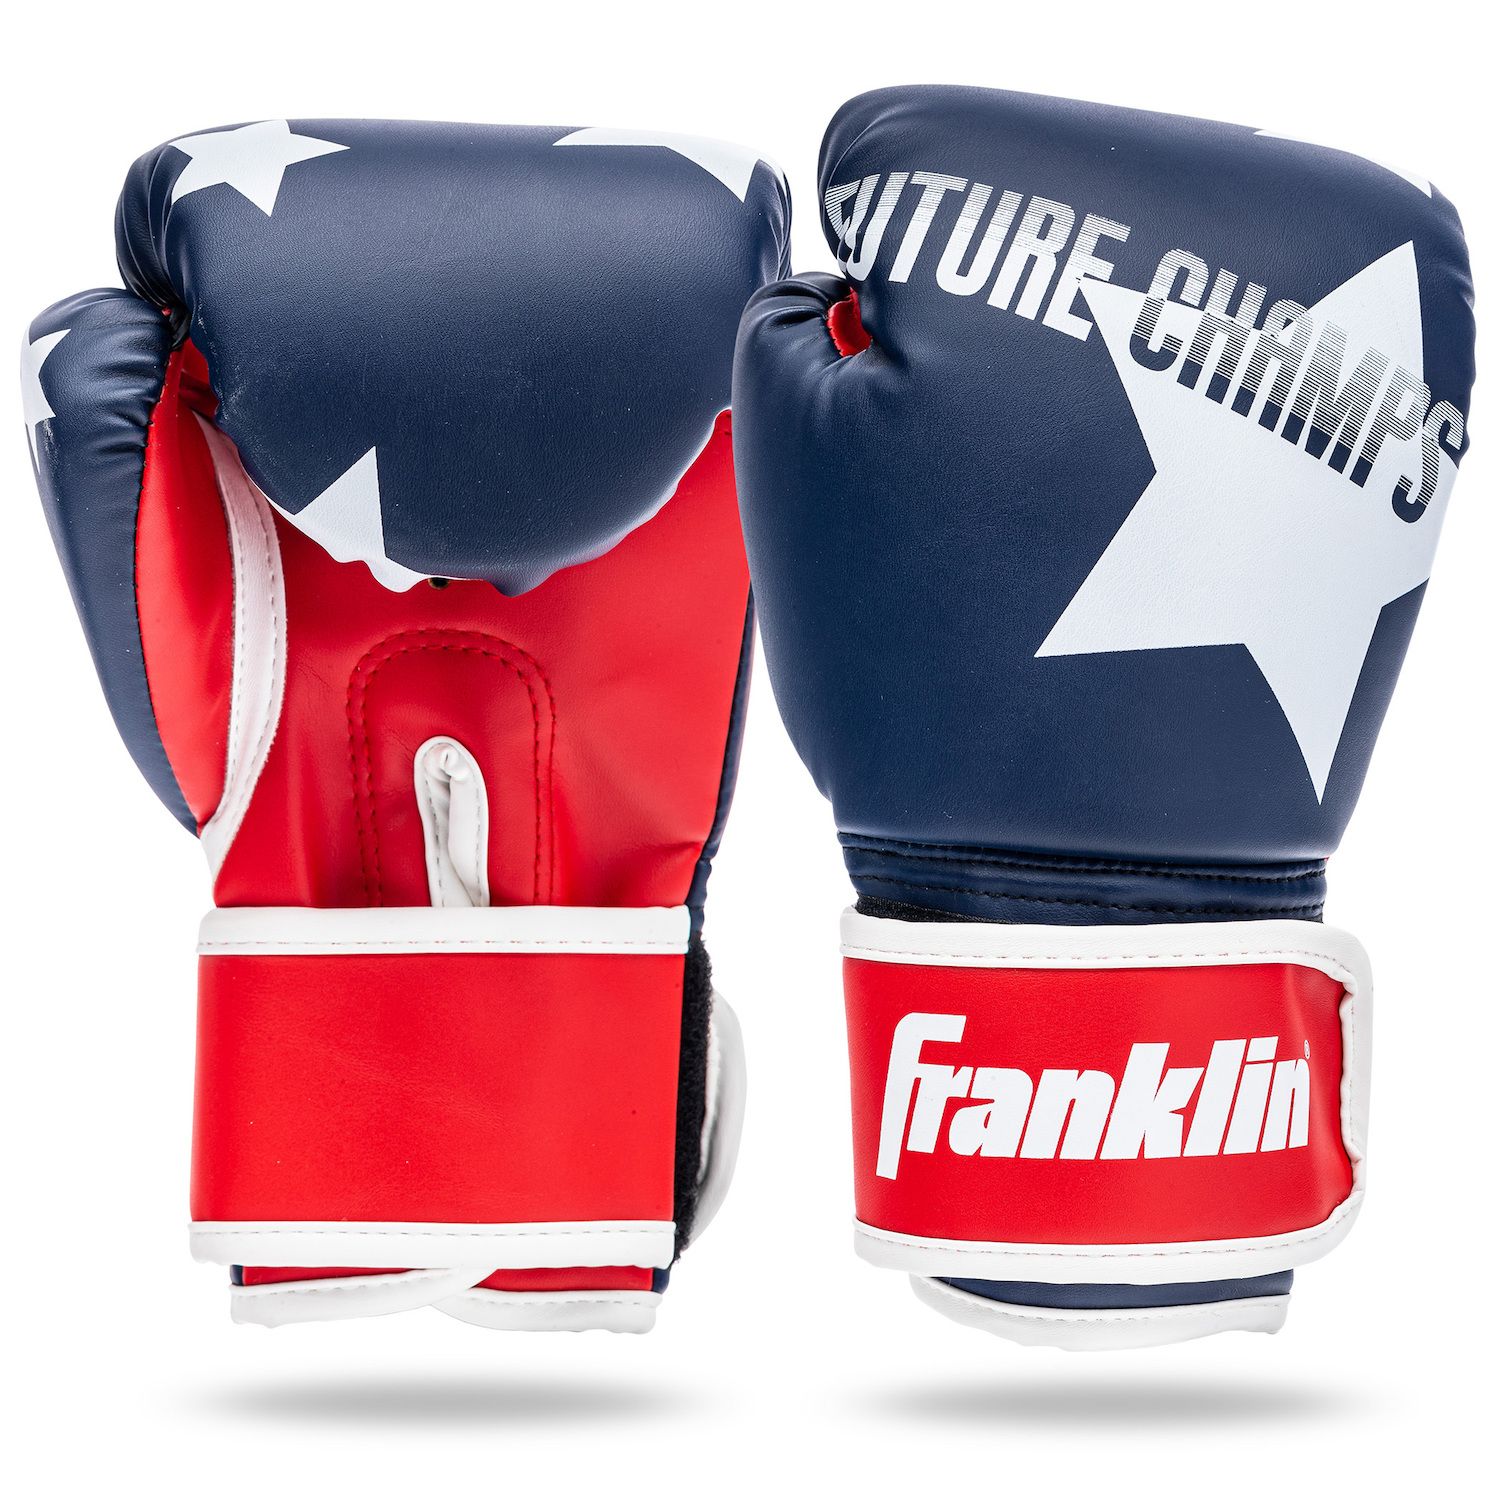 Kidoozie B-Active Adjustable Junior Boxing Set with Boxing Gloves